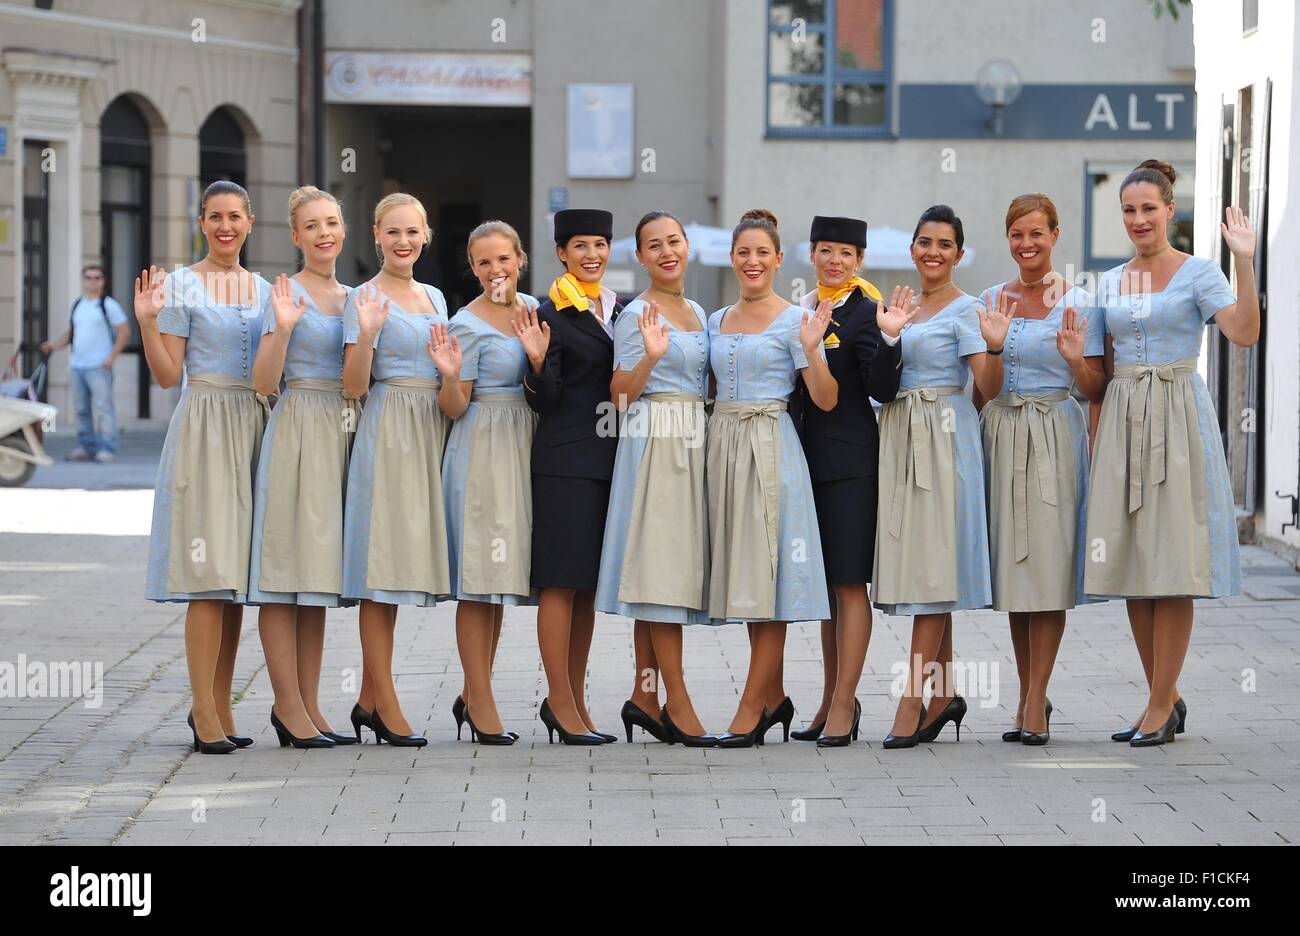 Munich, Germany. 1st Sep, 2015. Lufthansa stewardesses in traditional dress, which they will be wearing on selected routes and airports during the Oktoberfest, in Munich, Germany, 1 September 2015. To celebrate its 60th birthday, Lufthansa is having its traditional uniforms from the 1950s recreated by Trachten Angermaier. Credit:  dpa picture alliance/Alamy Live News Stock Photo